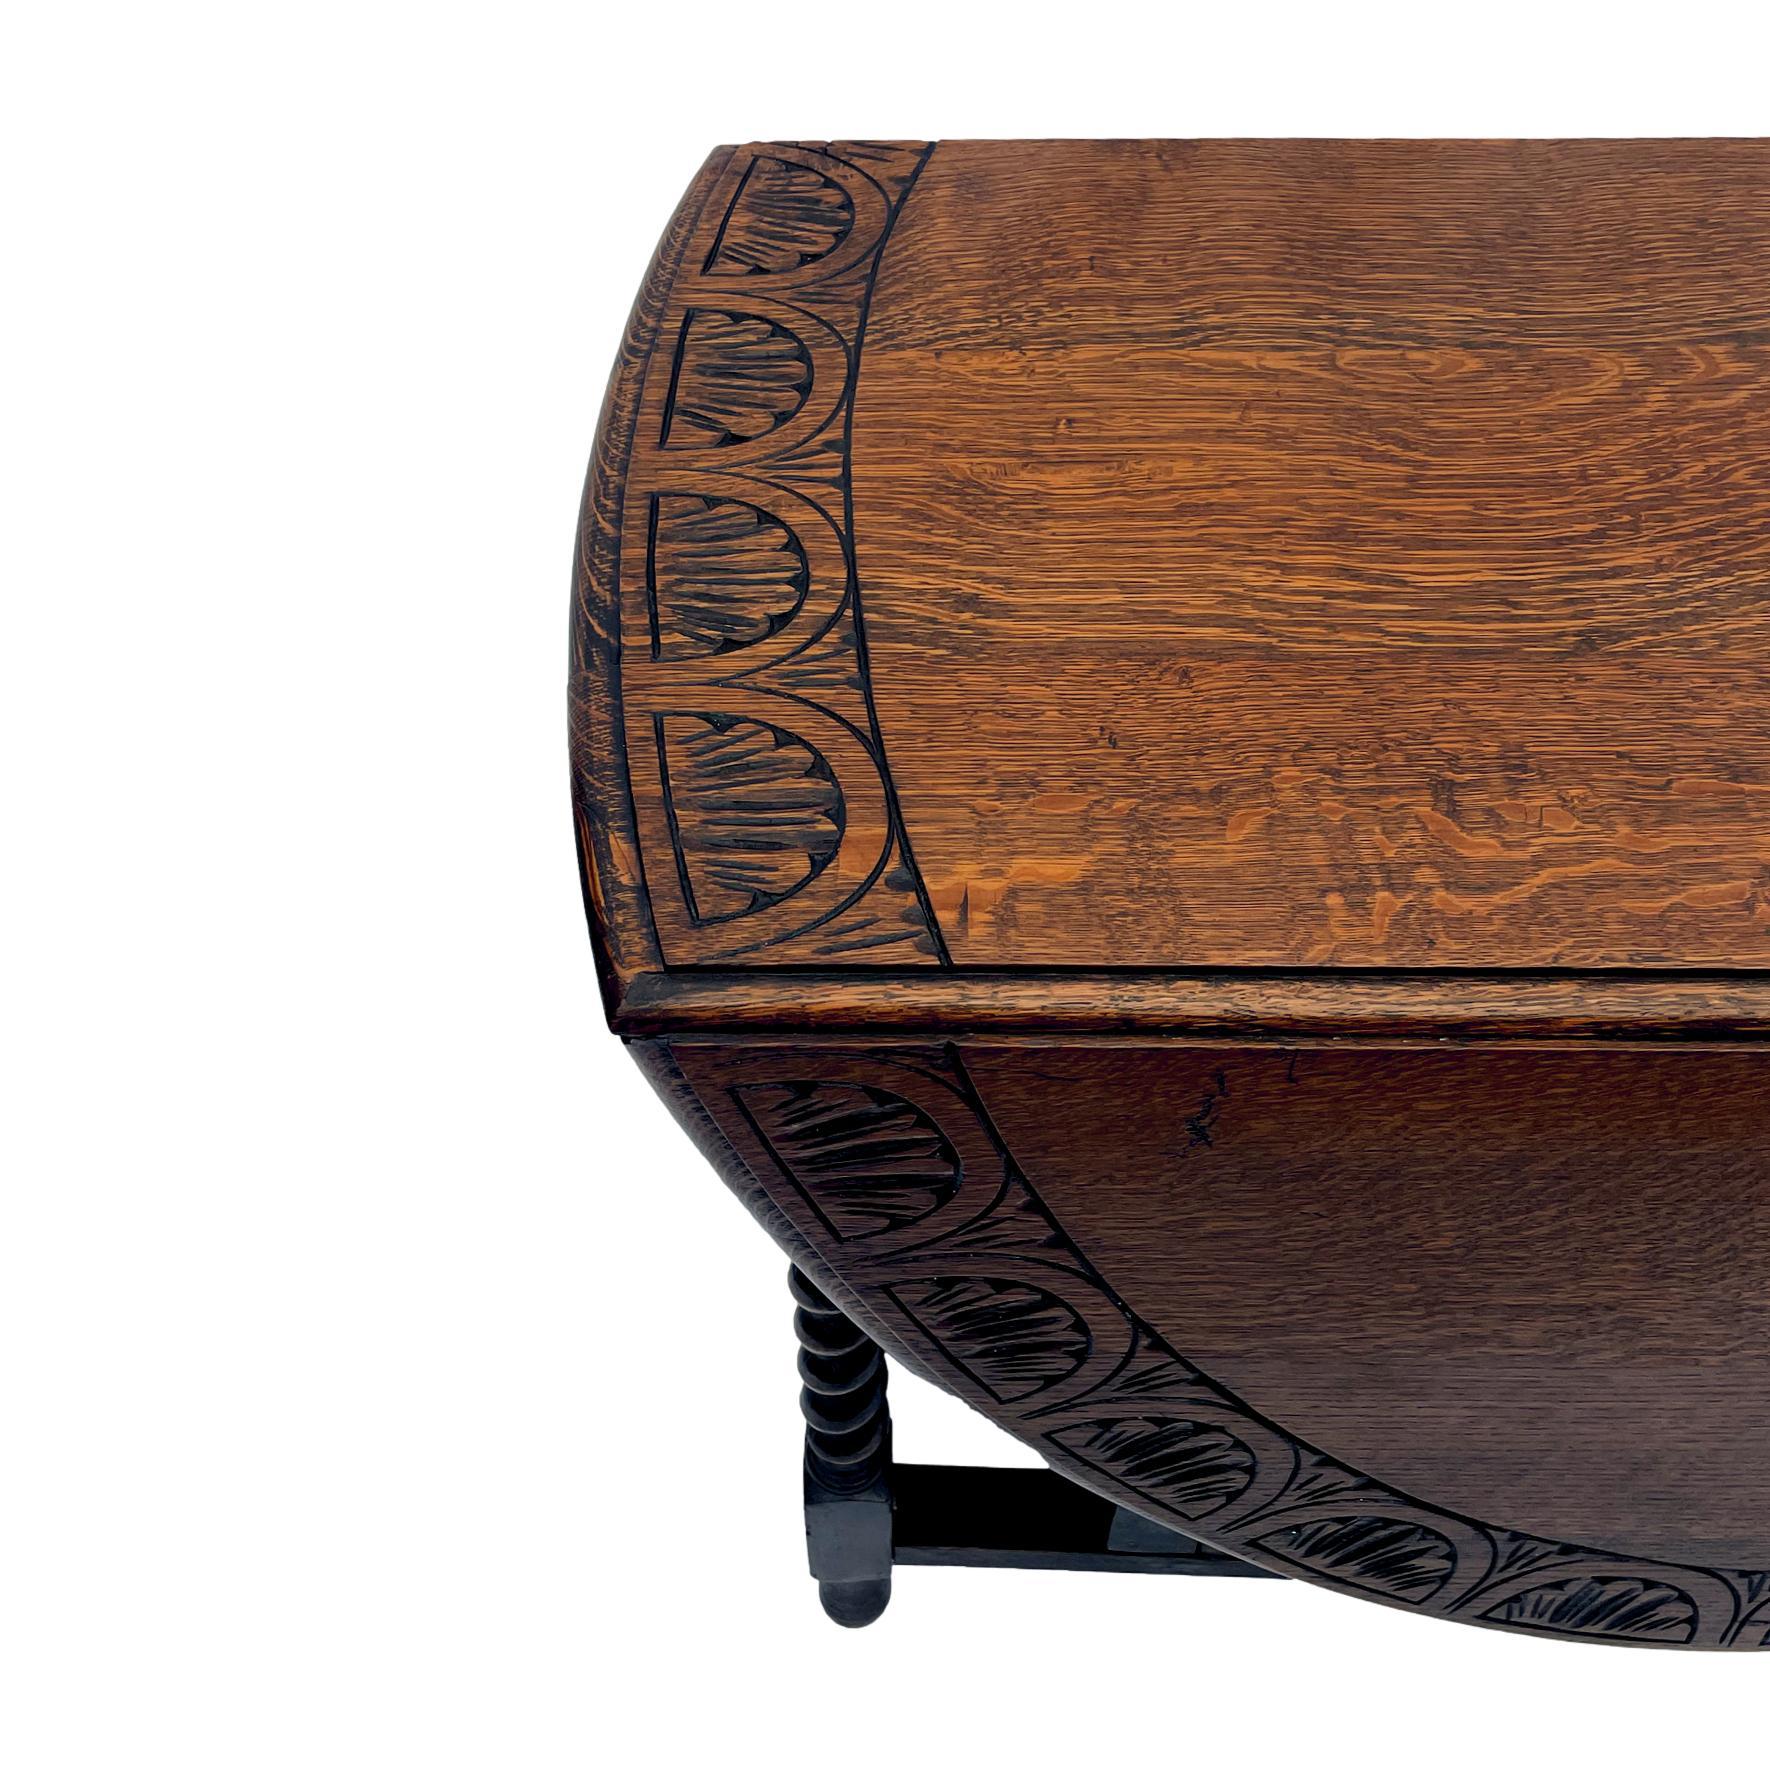 20th Century Oak Barley Twist Drop-Leaf Table with a Carved Top, English, circa 1920 For Sale